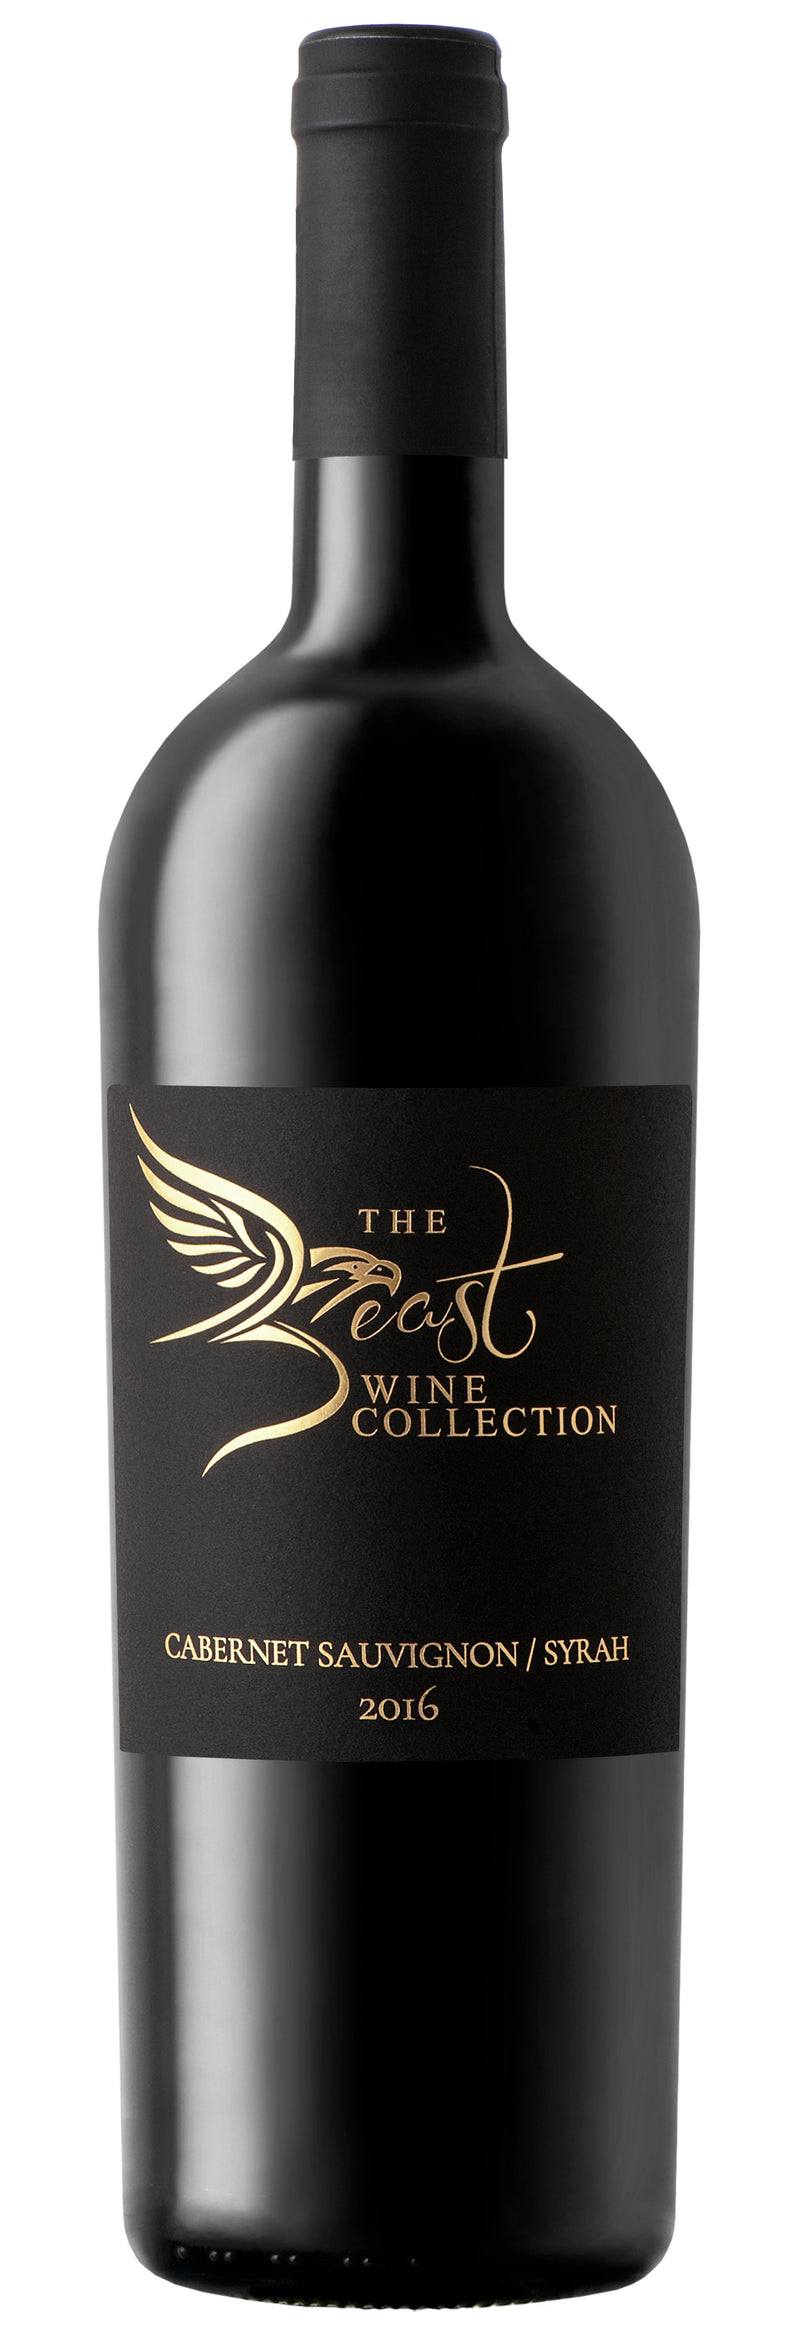 The Beast Wine Collection 2016